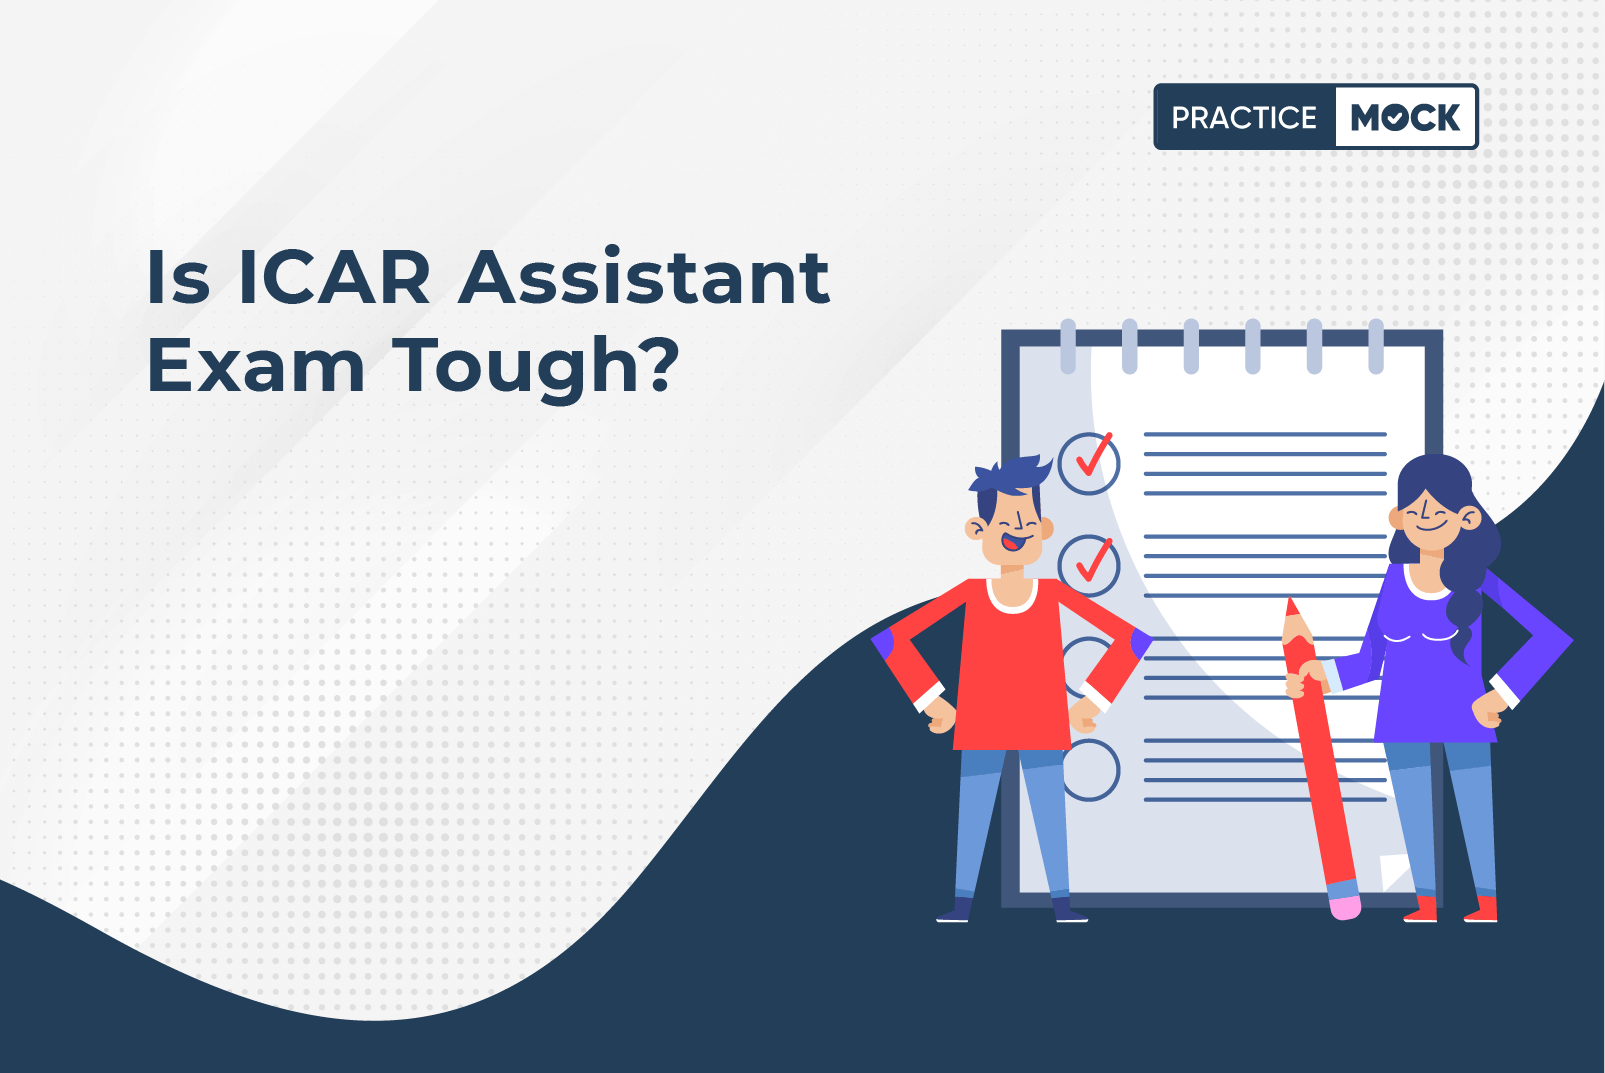 Is the ICAR Assistant exam tough?